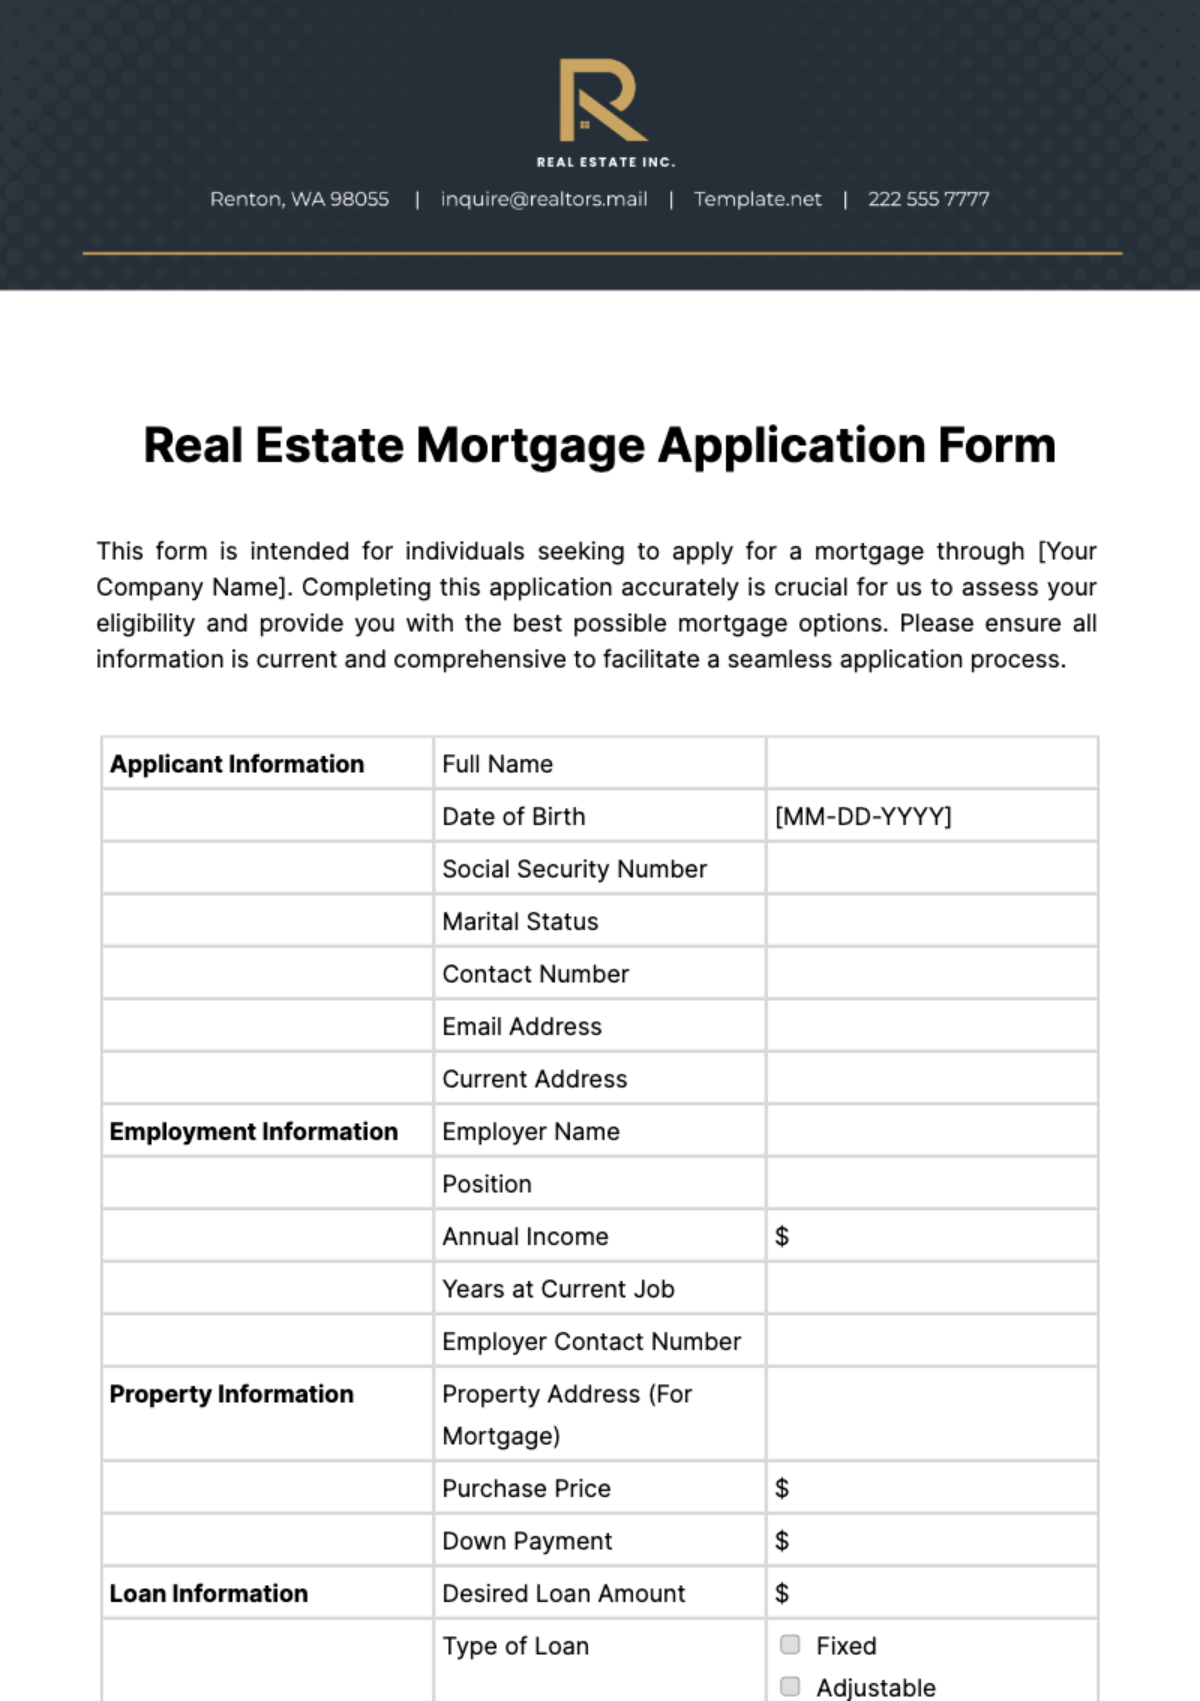 Real Estate Mortgage Application Form Template